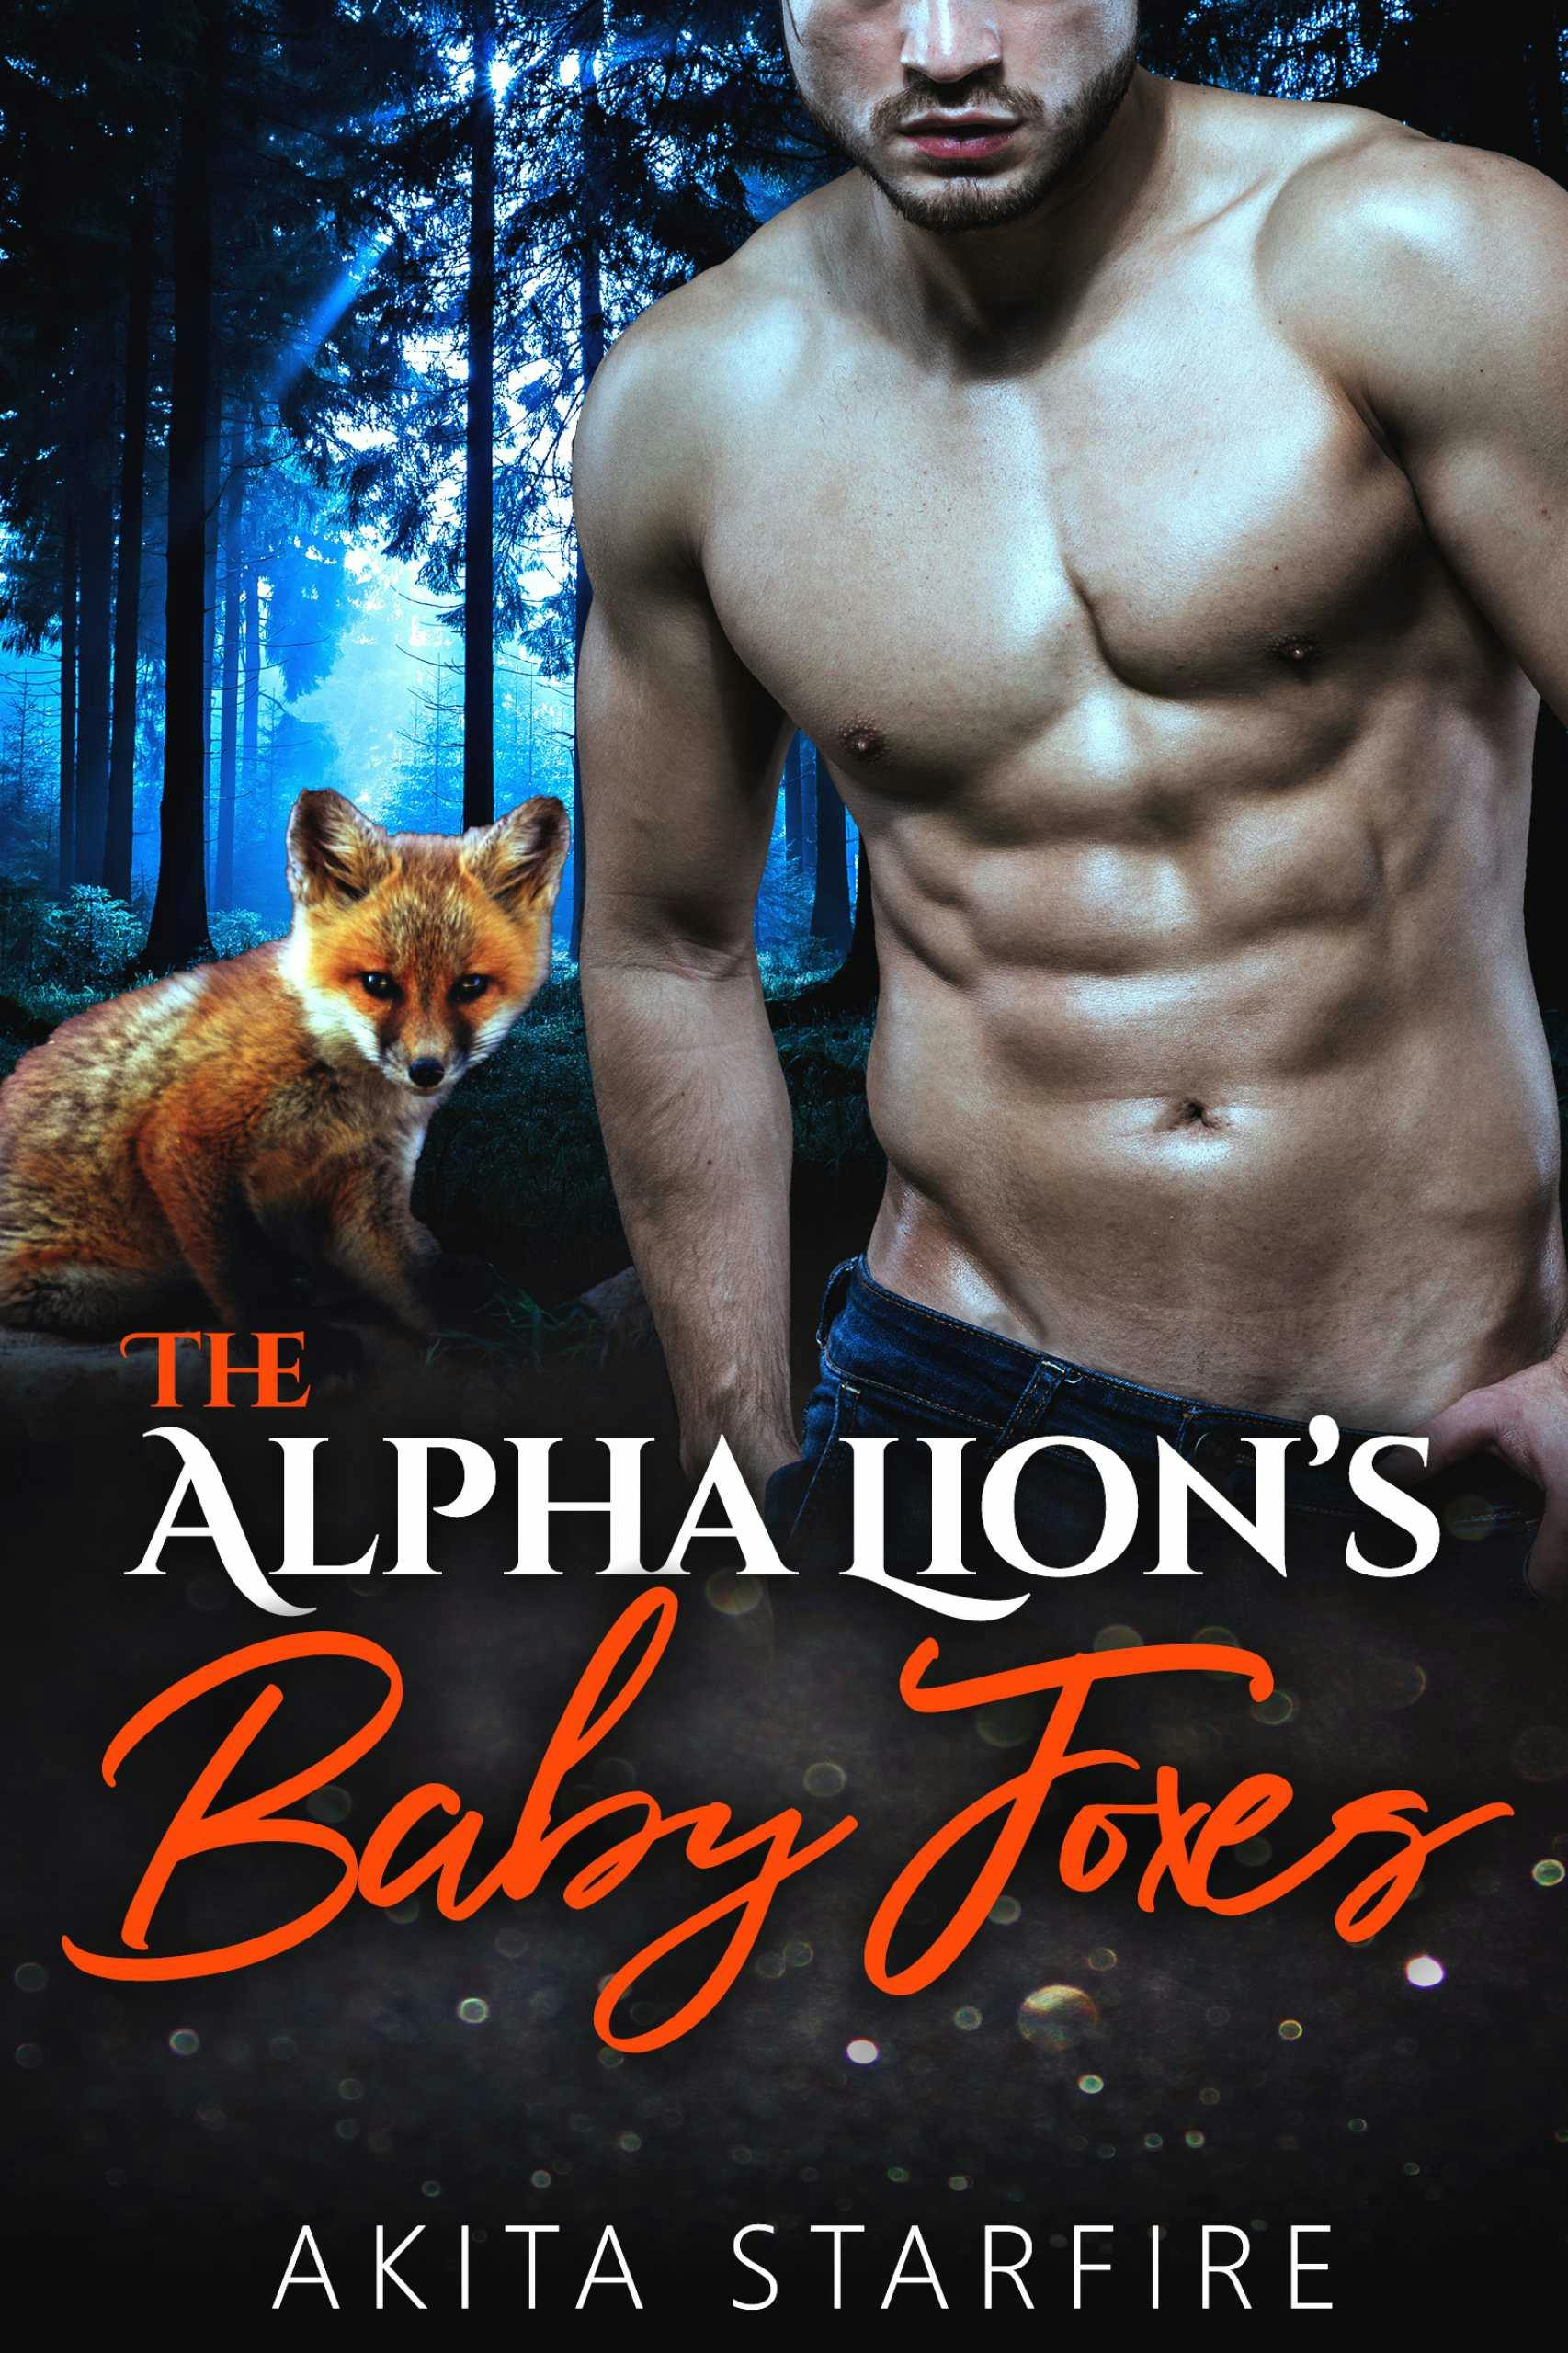 The Alpha Lion's Baby Foxes - Akita StarFire